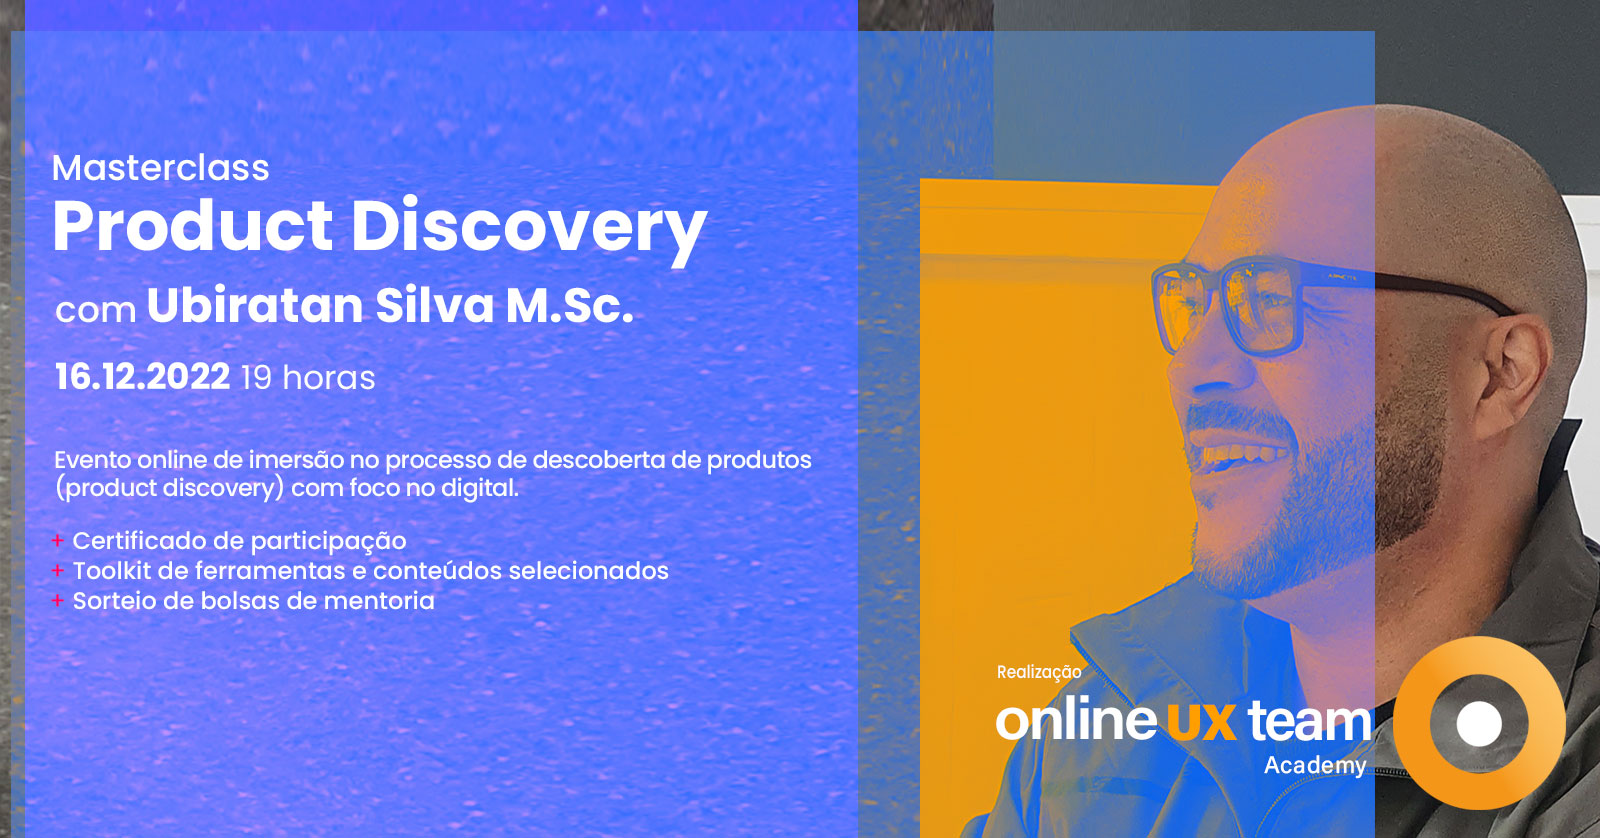 Masterclass Product Discovery